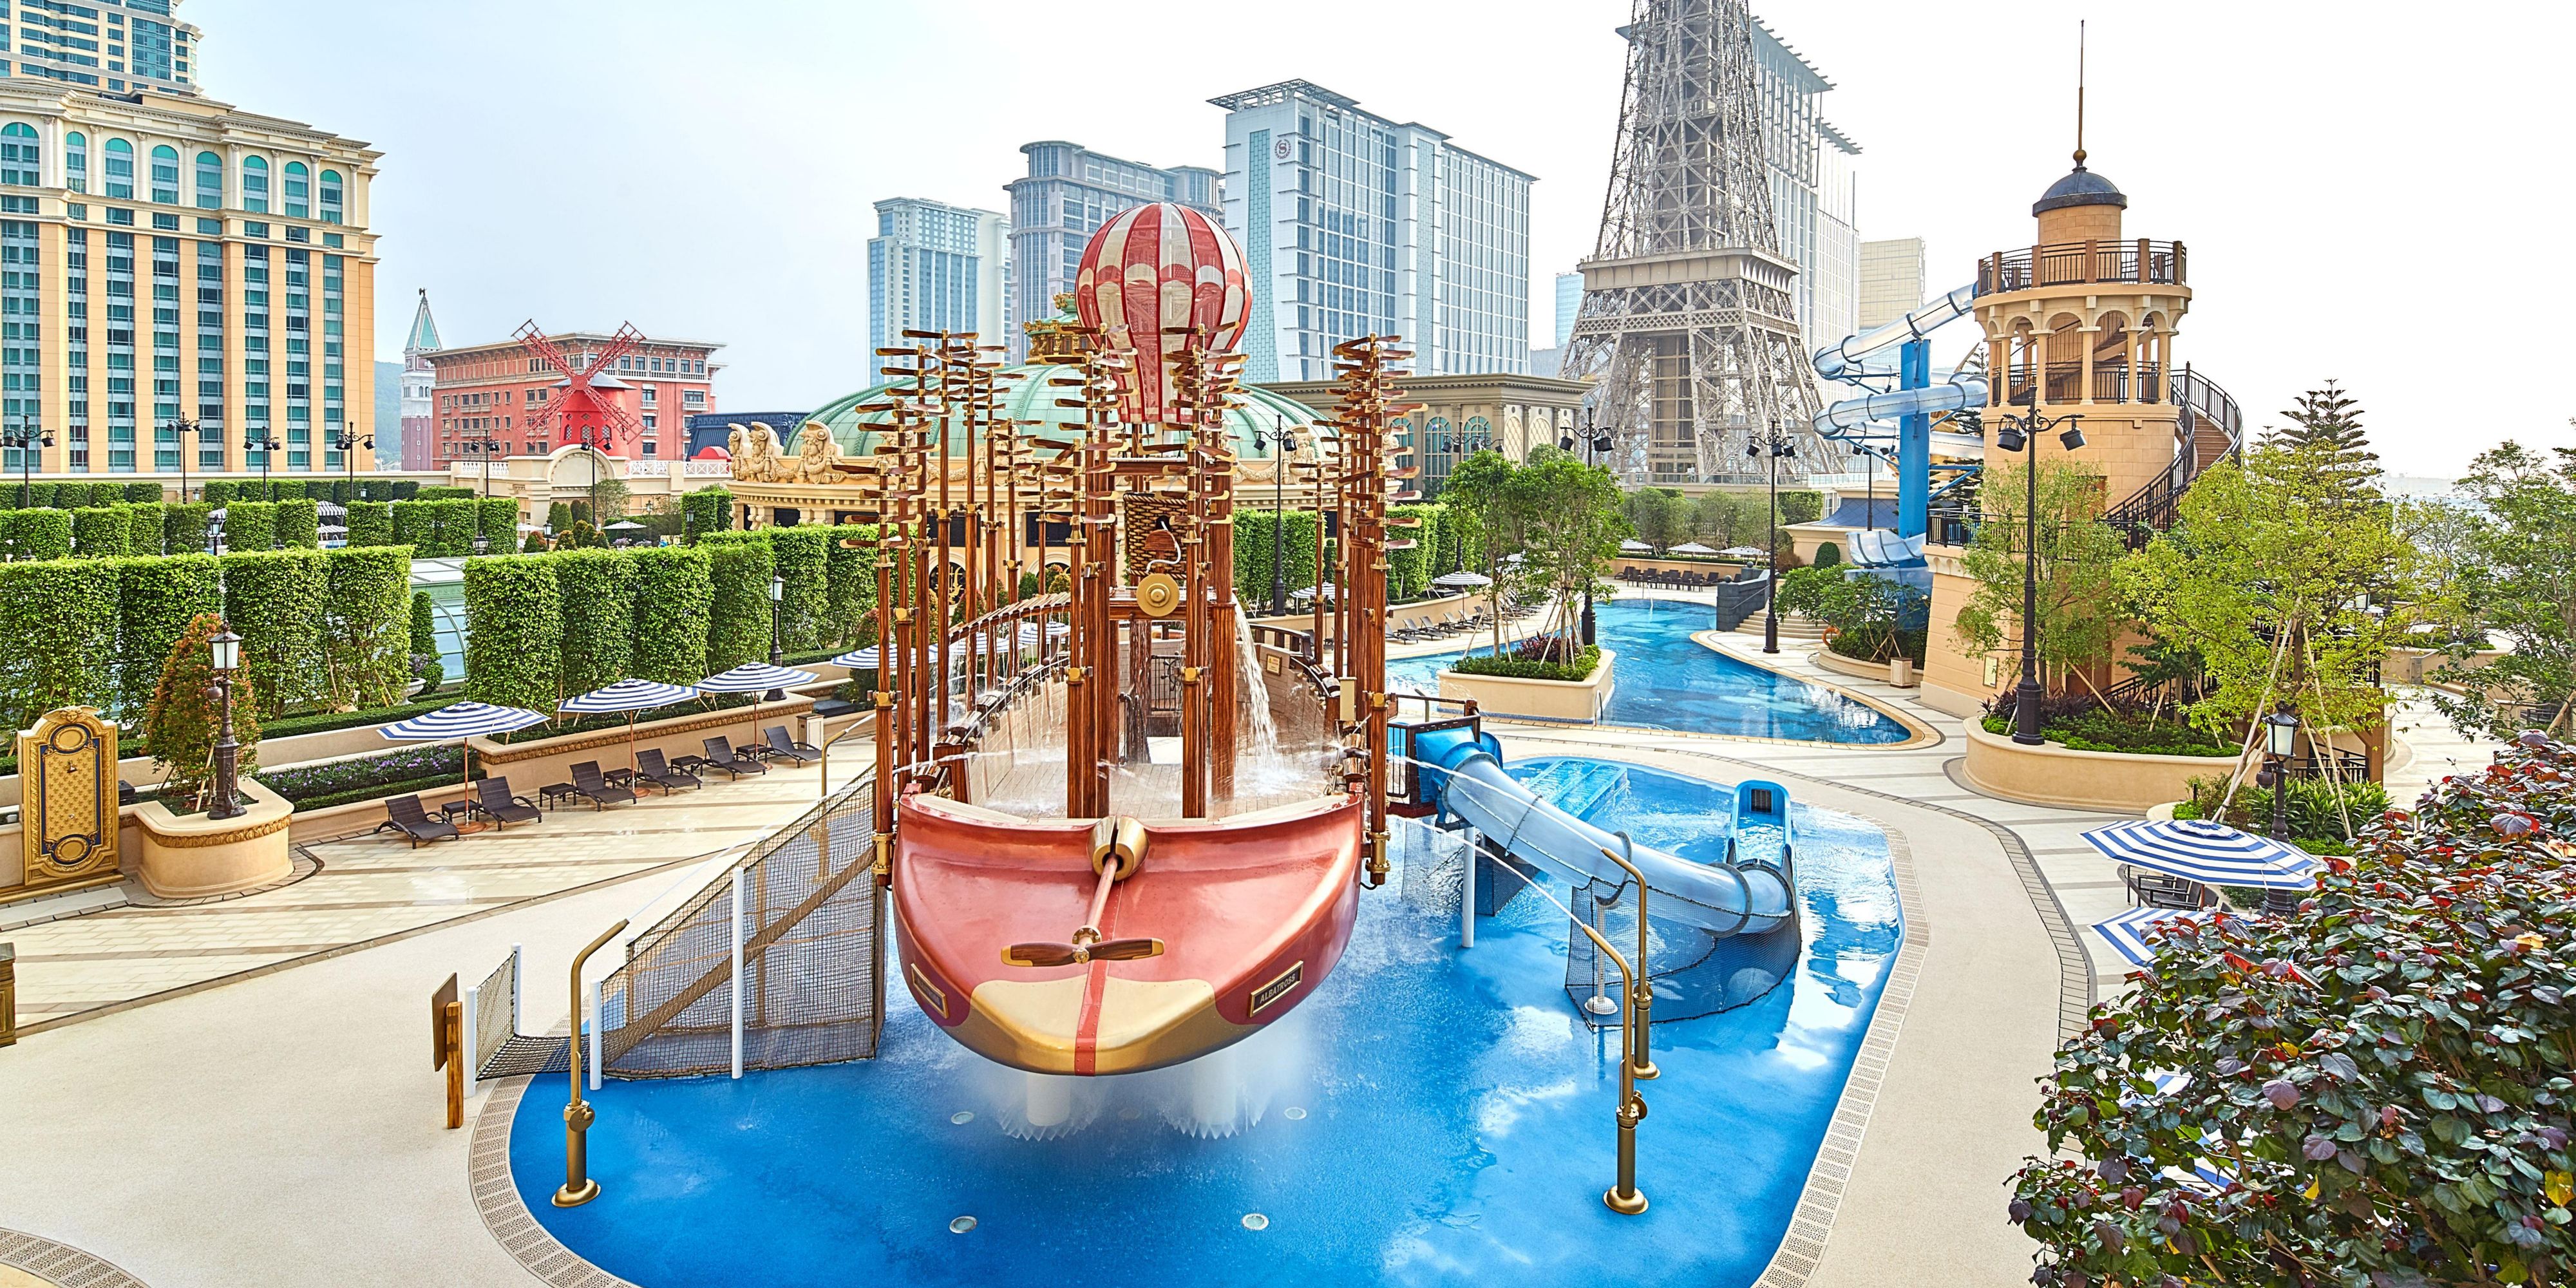 At The Parisian Macao, there is a wide range of fun-filled activities for the whole family. Qube Kingdom offers over 1,800sqm of indoor and outdoor fun. Aqua World, the brand new pay-for-play area. Big kids and children-at-heart alike will love our waterslides and the thrill of splashing to the pool at the end of each one.